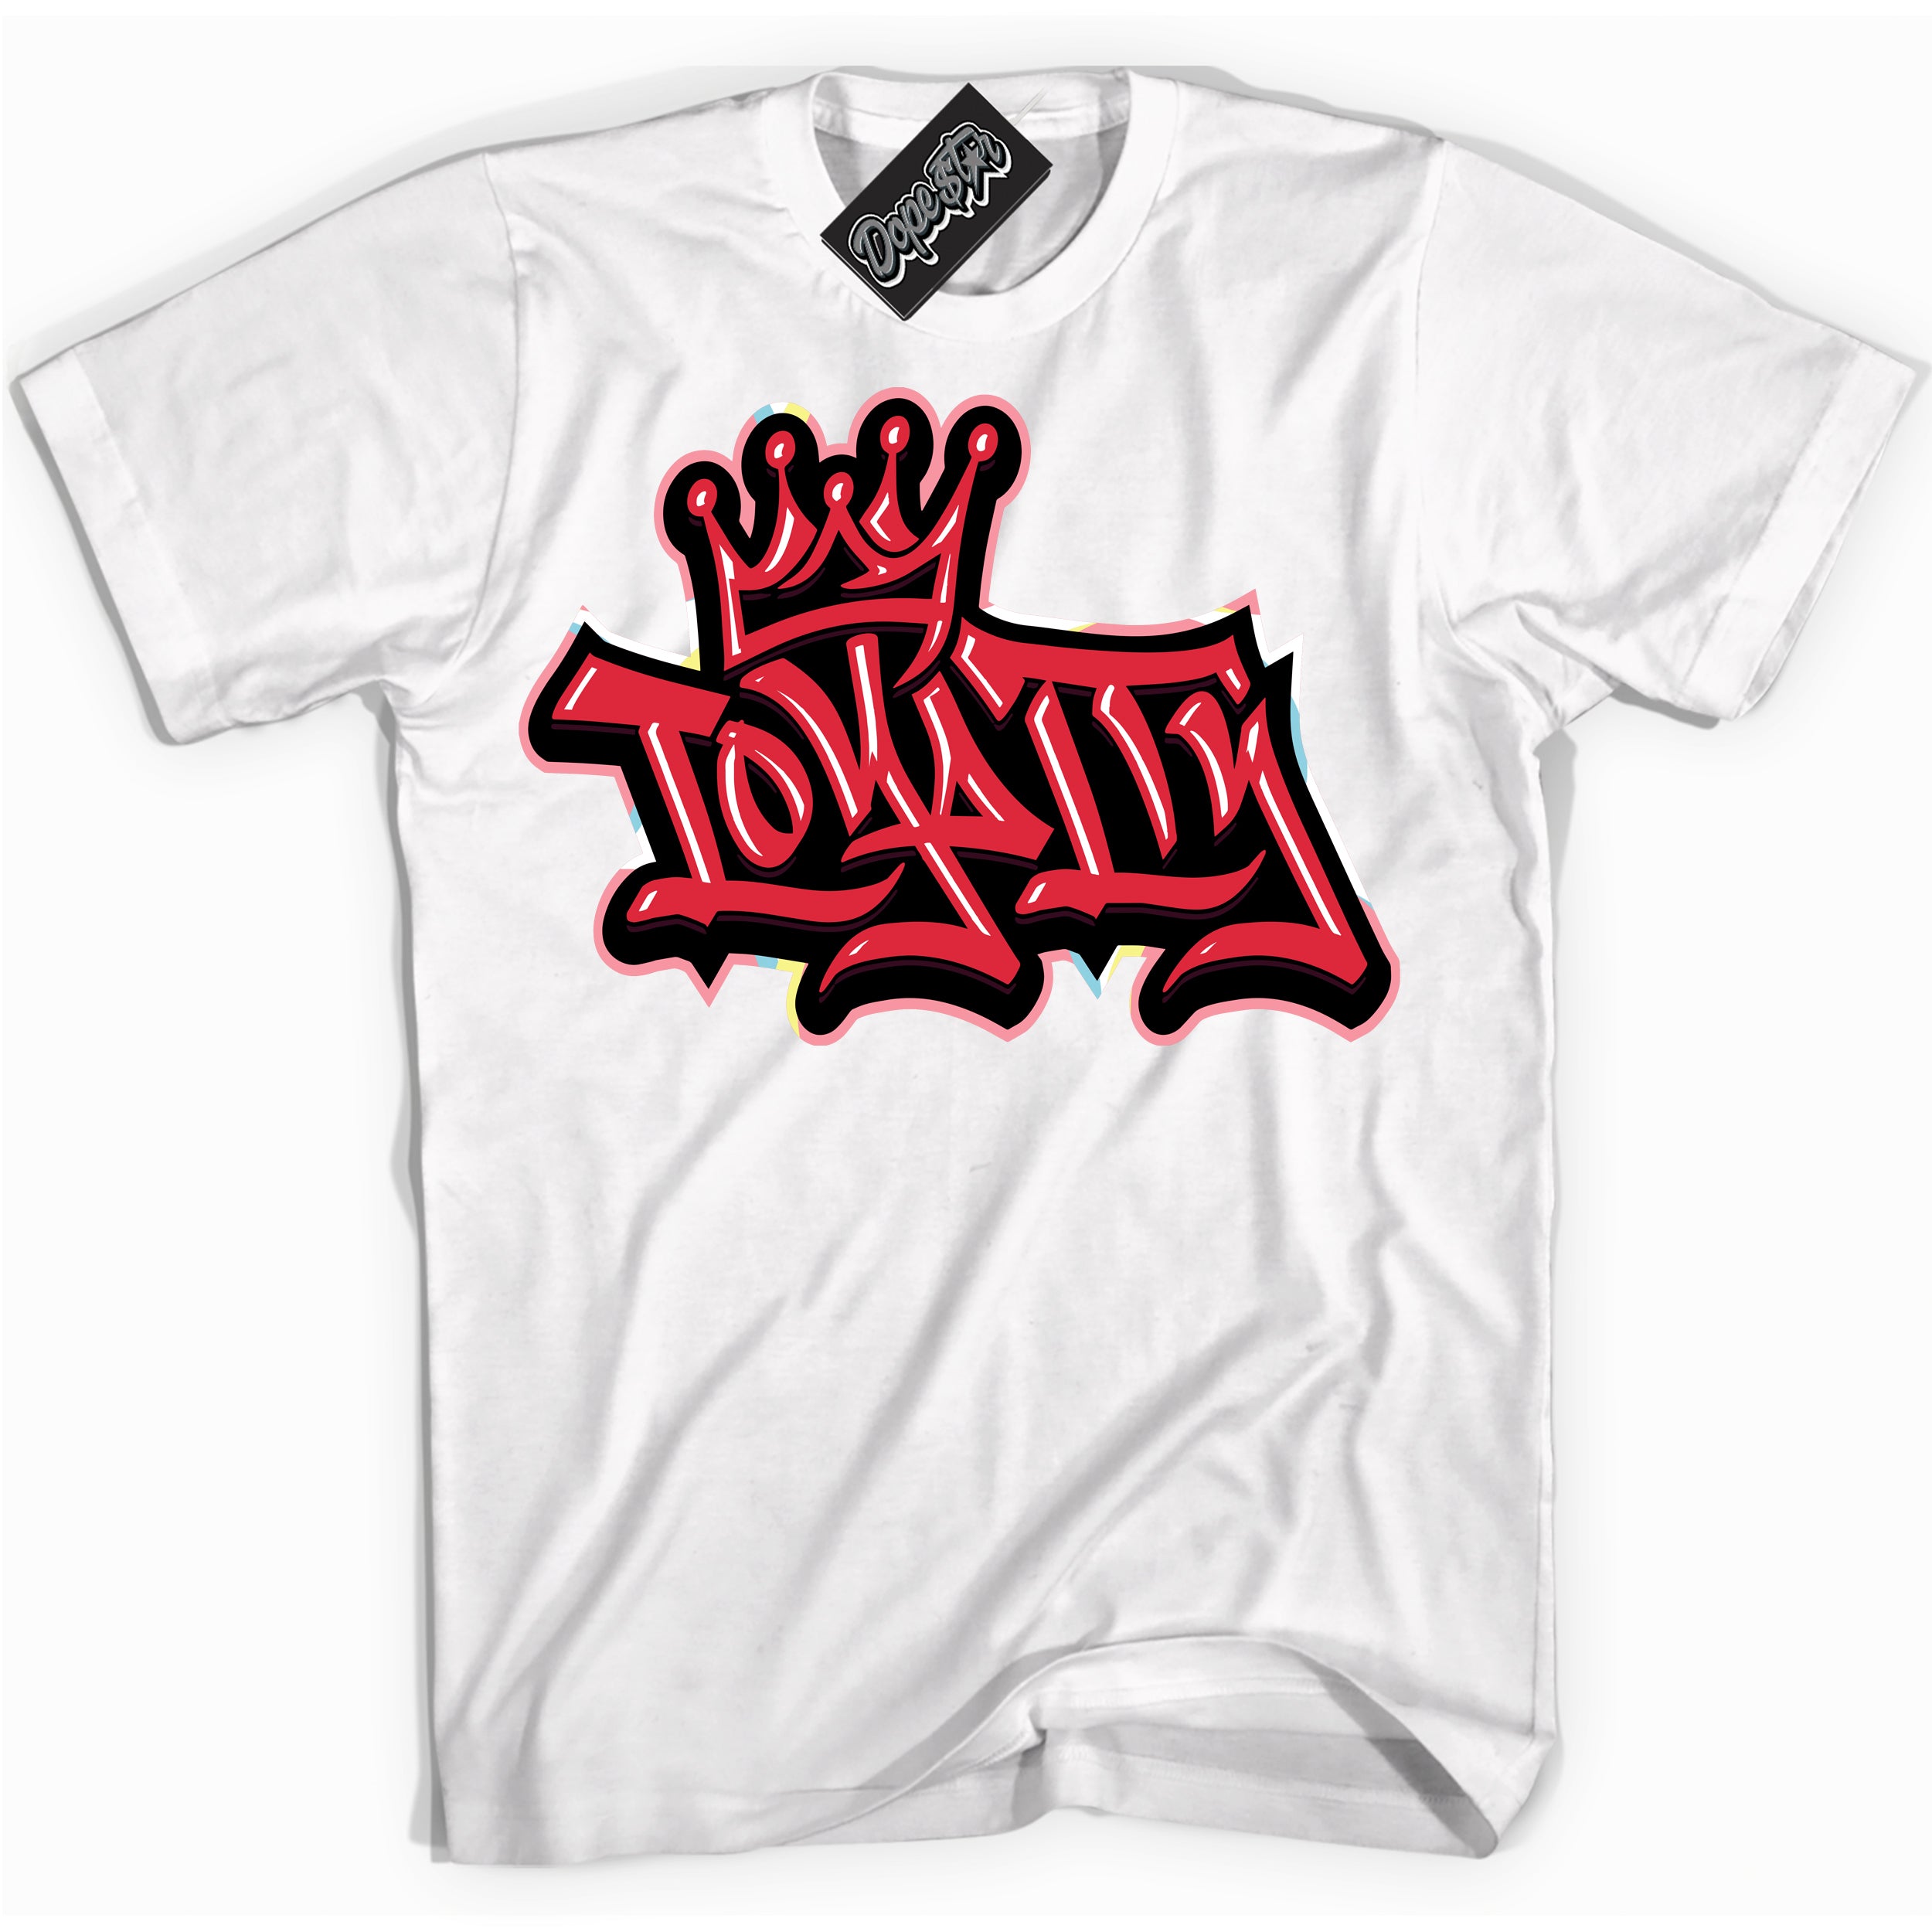 Cool White graphic tee with “ Loyalty Crown ” design, that perfectly matches Spider-Verse 1s sneakers 